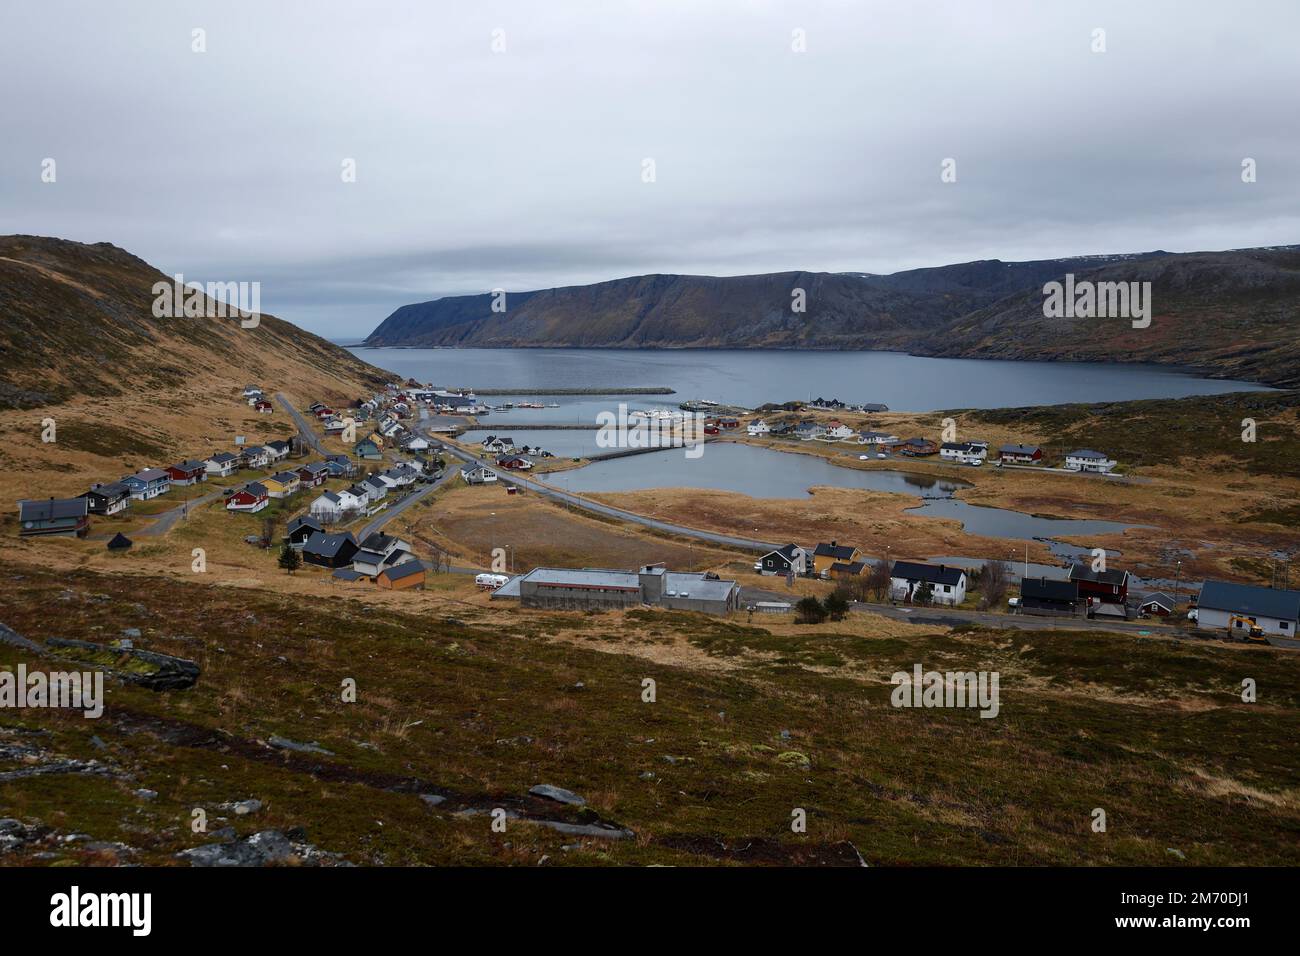 View of the fishing village of Skarsvåg on the Nordkapp in Norway Stock Photo